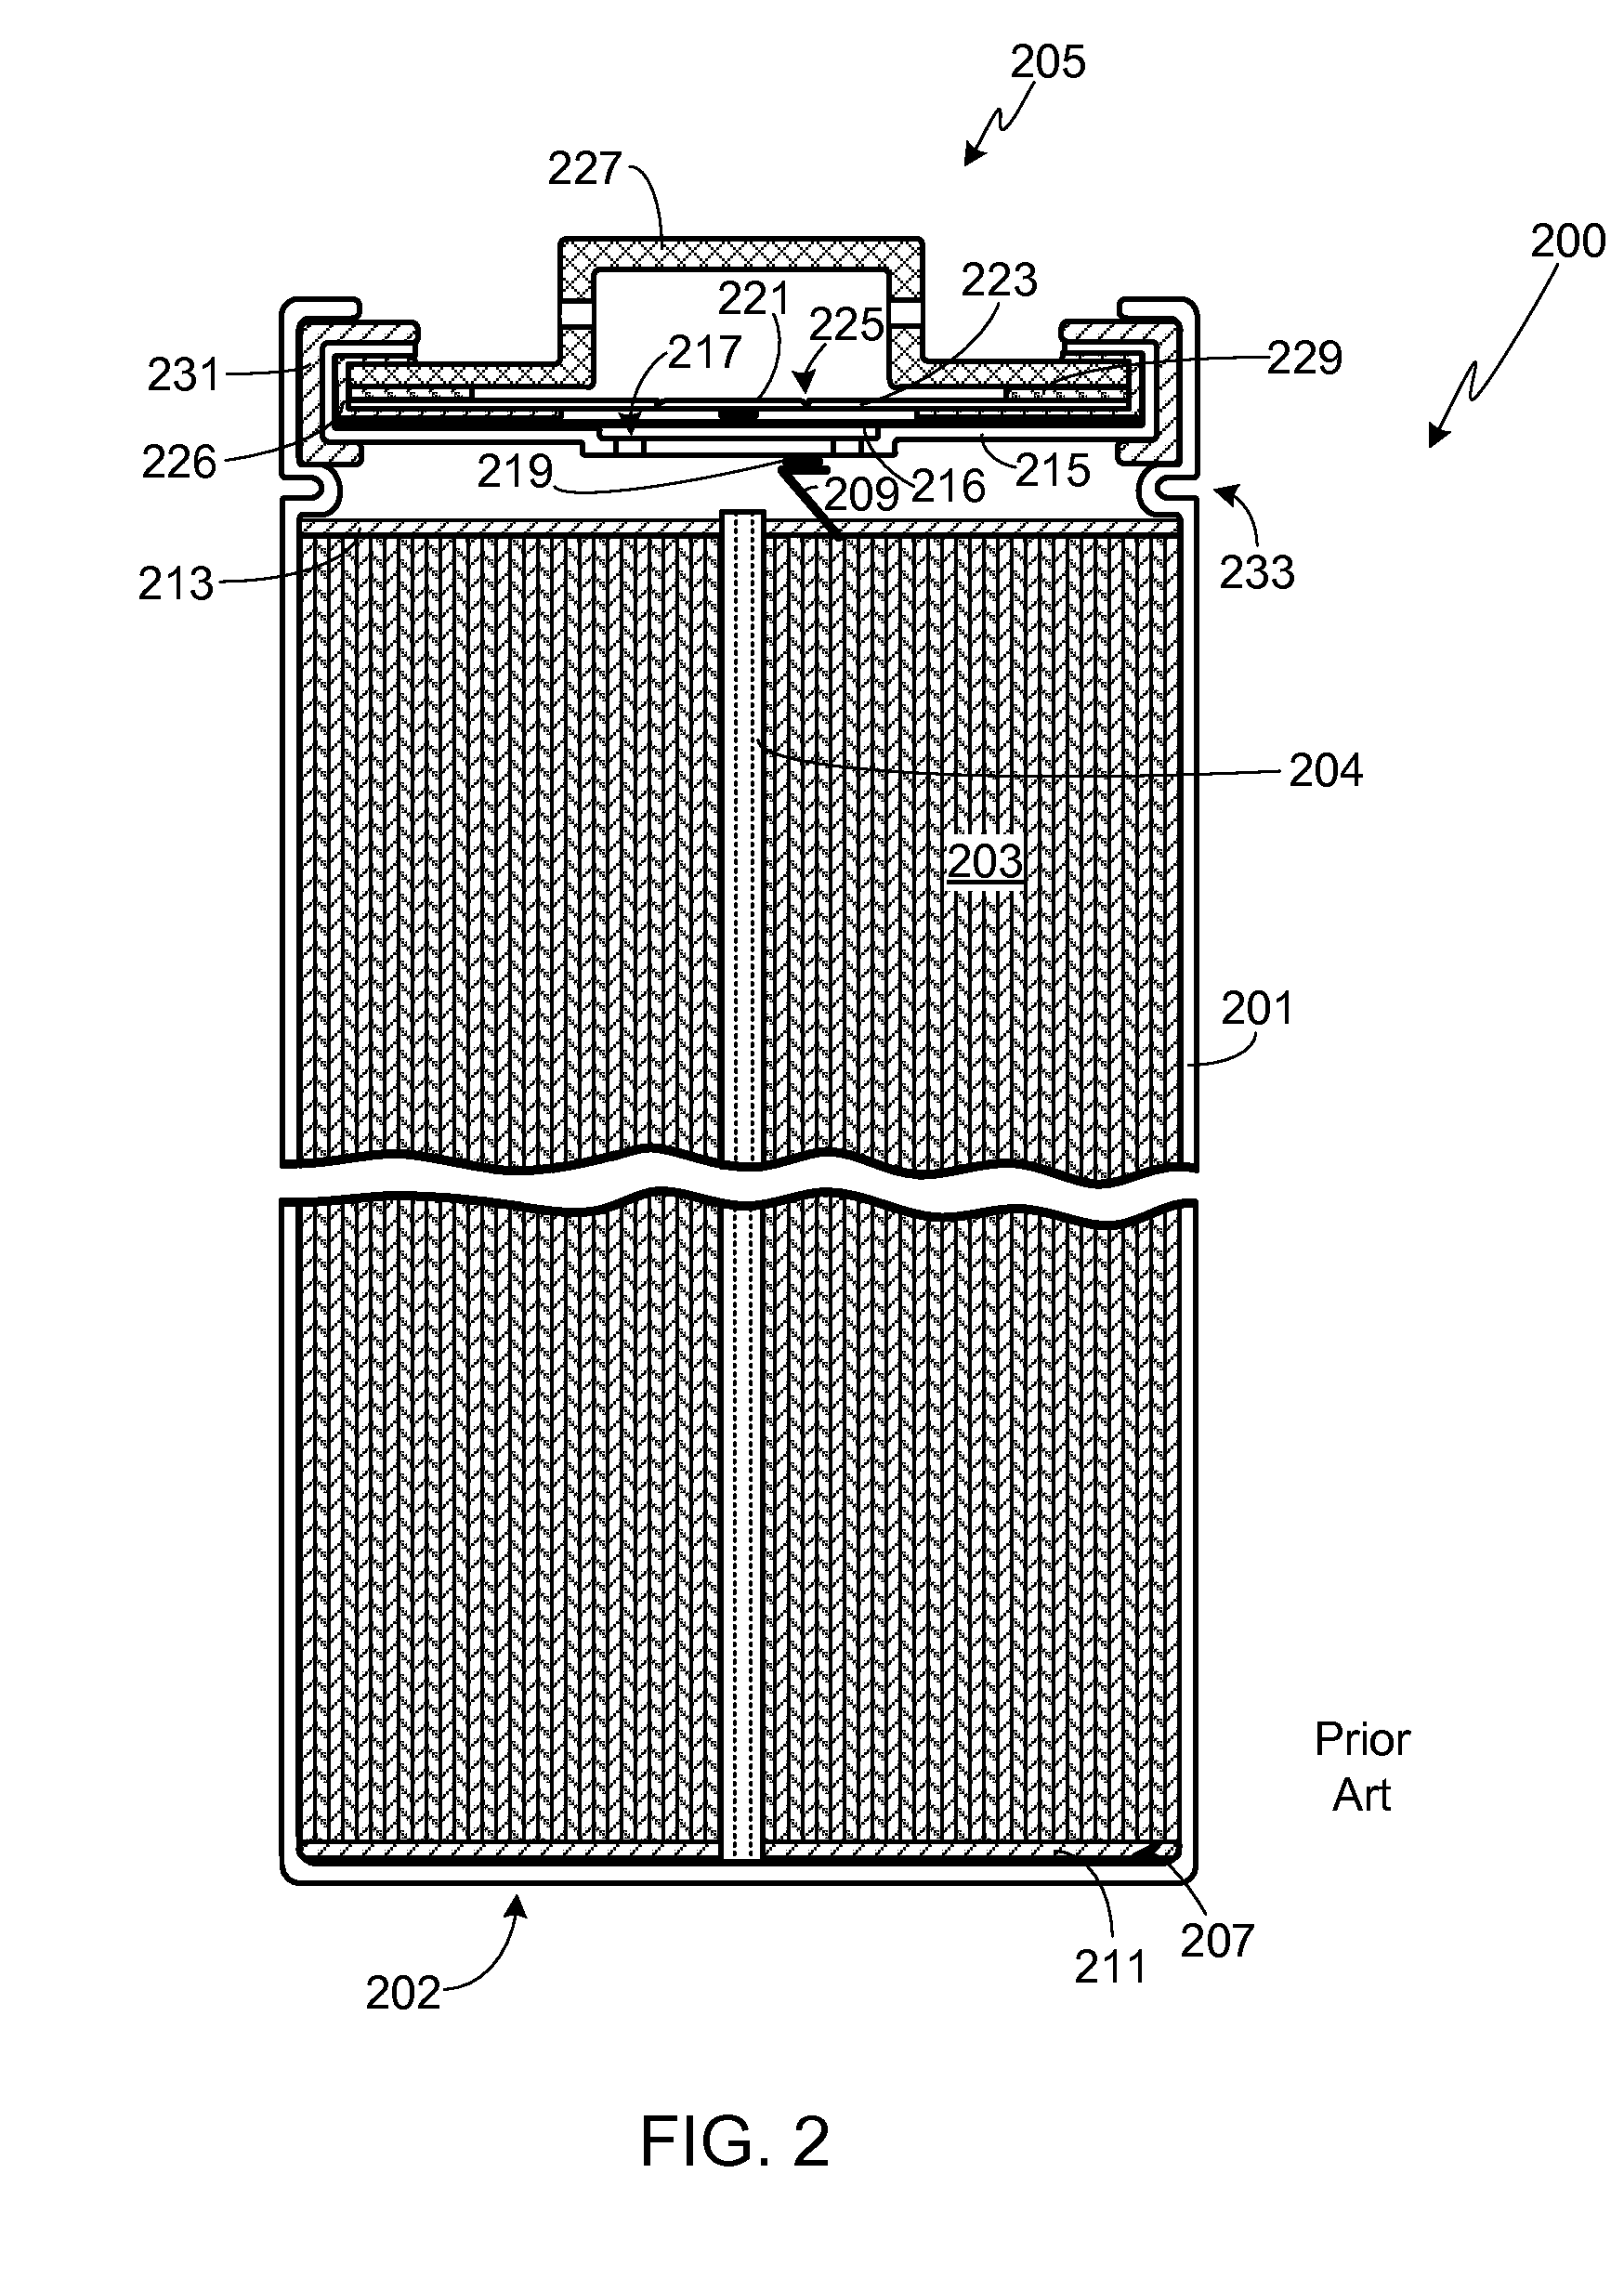 Battery Pack Configuration to Reduce Hazards Associated with Internal Short Circuits